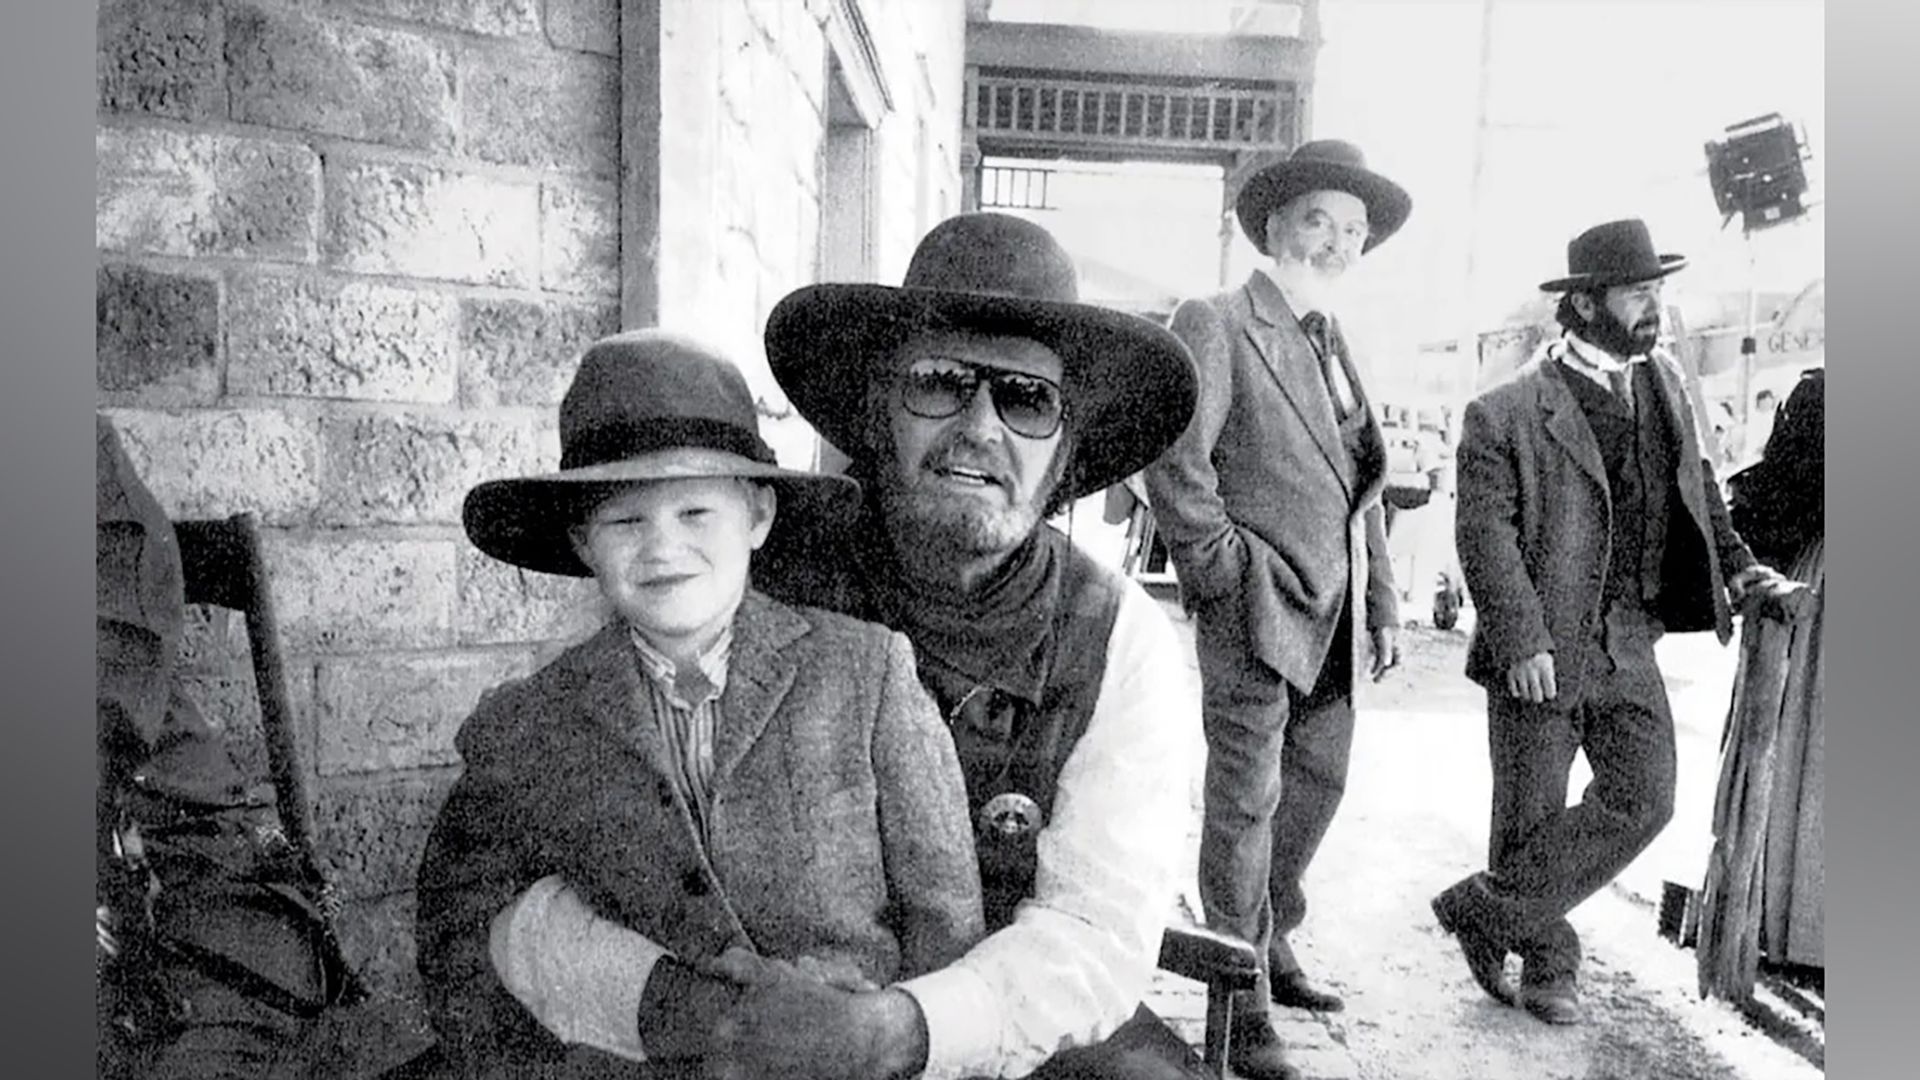 Young Jesse Plemons on the set of the TV series 'Streets of Laredo'